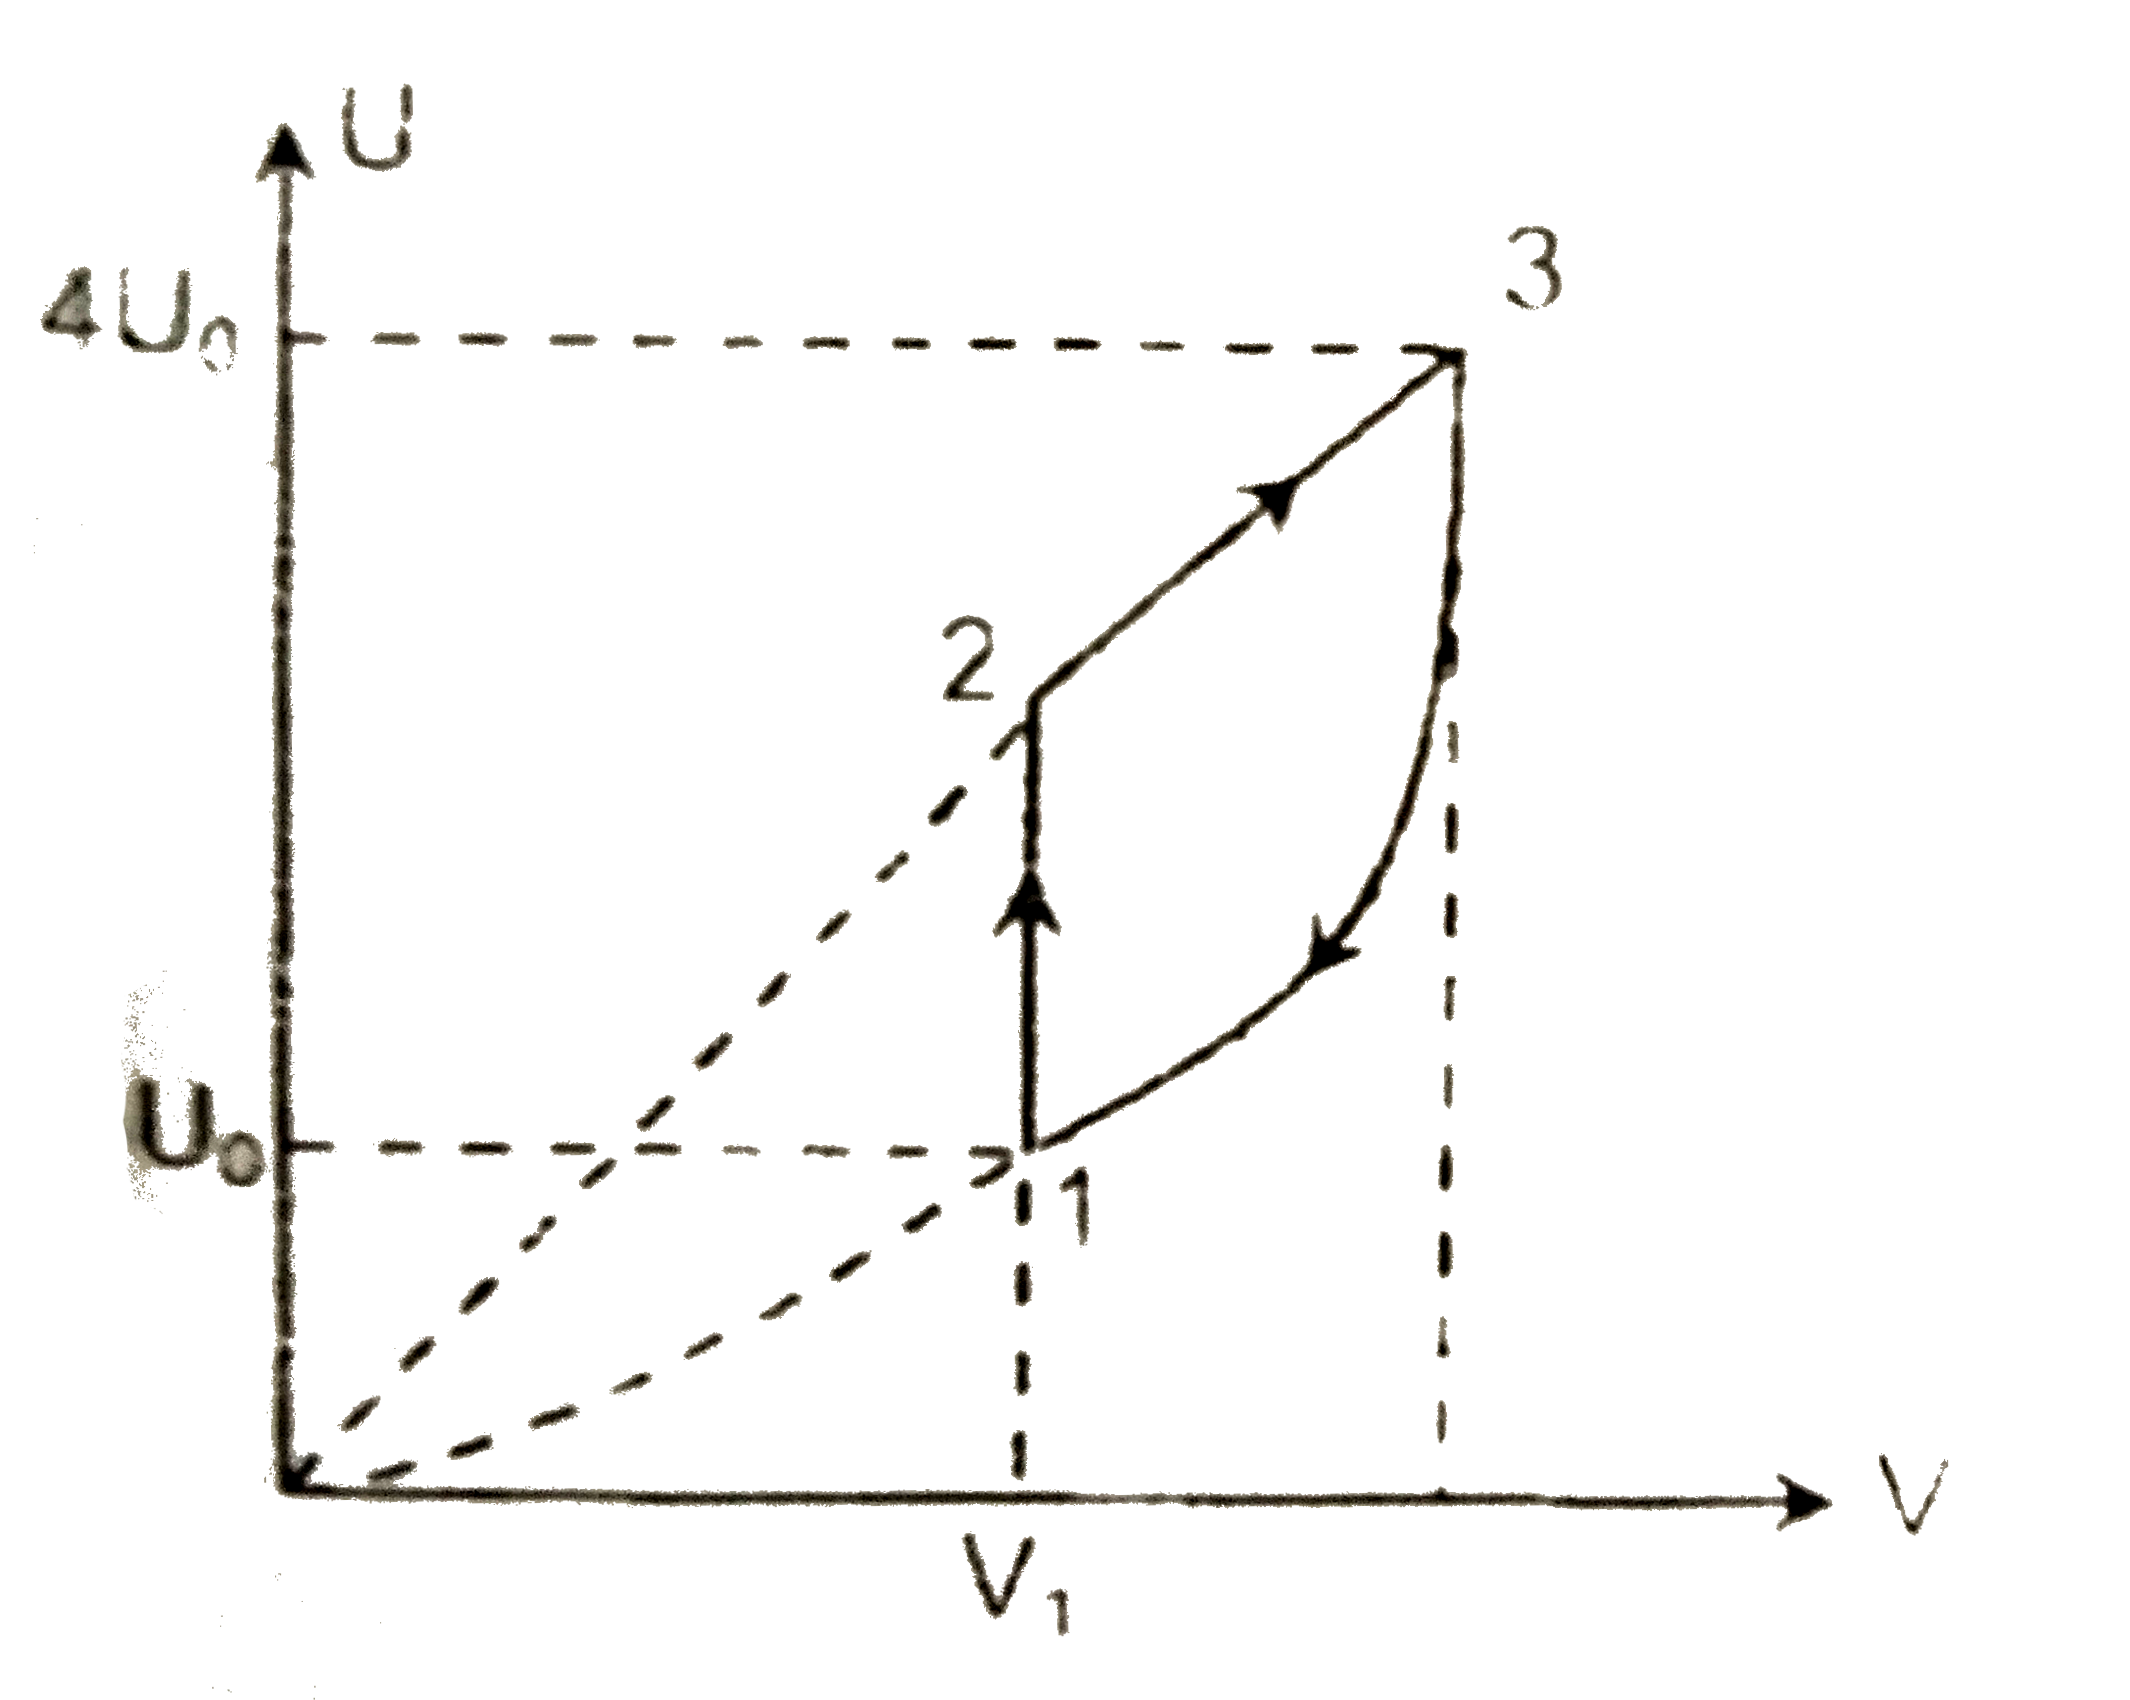 One mole of helium gas follow cycle 1-2-3-1 shown in the diagram. During process 3-1, the internal energy (U) of the gas depends on its volume (V) as U=bV^(2), where b is a positive constant. If gas releases the amount of heat Q during process 3-1 and gas absorbs the amount of heat Q(2) during process 1rarr2rarr3.    The value of ratio of volume of gas in state -3(V(3)) to that of gas in state -1(V(1)) is: